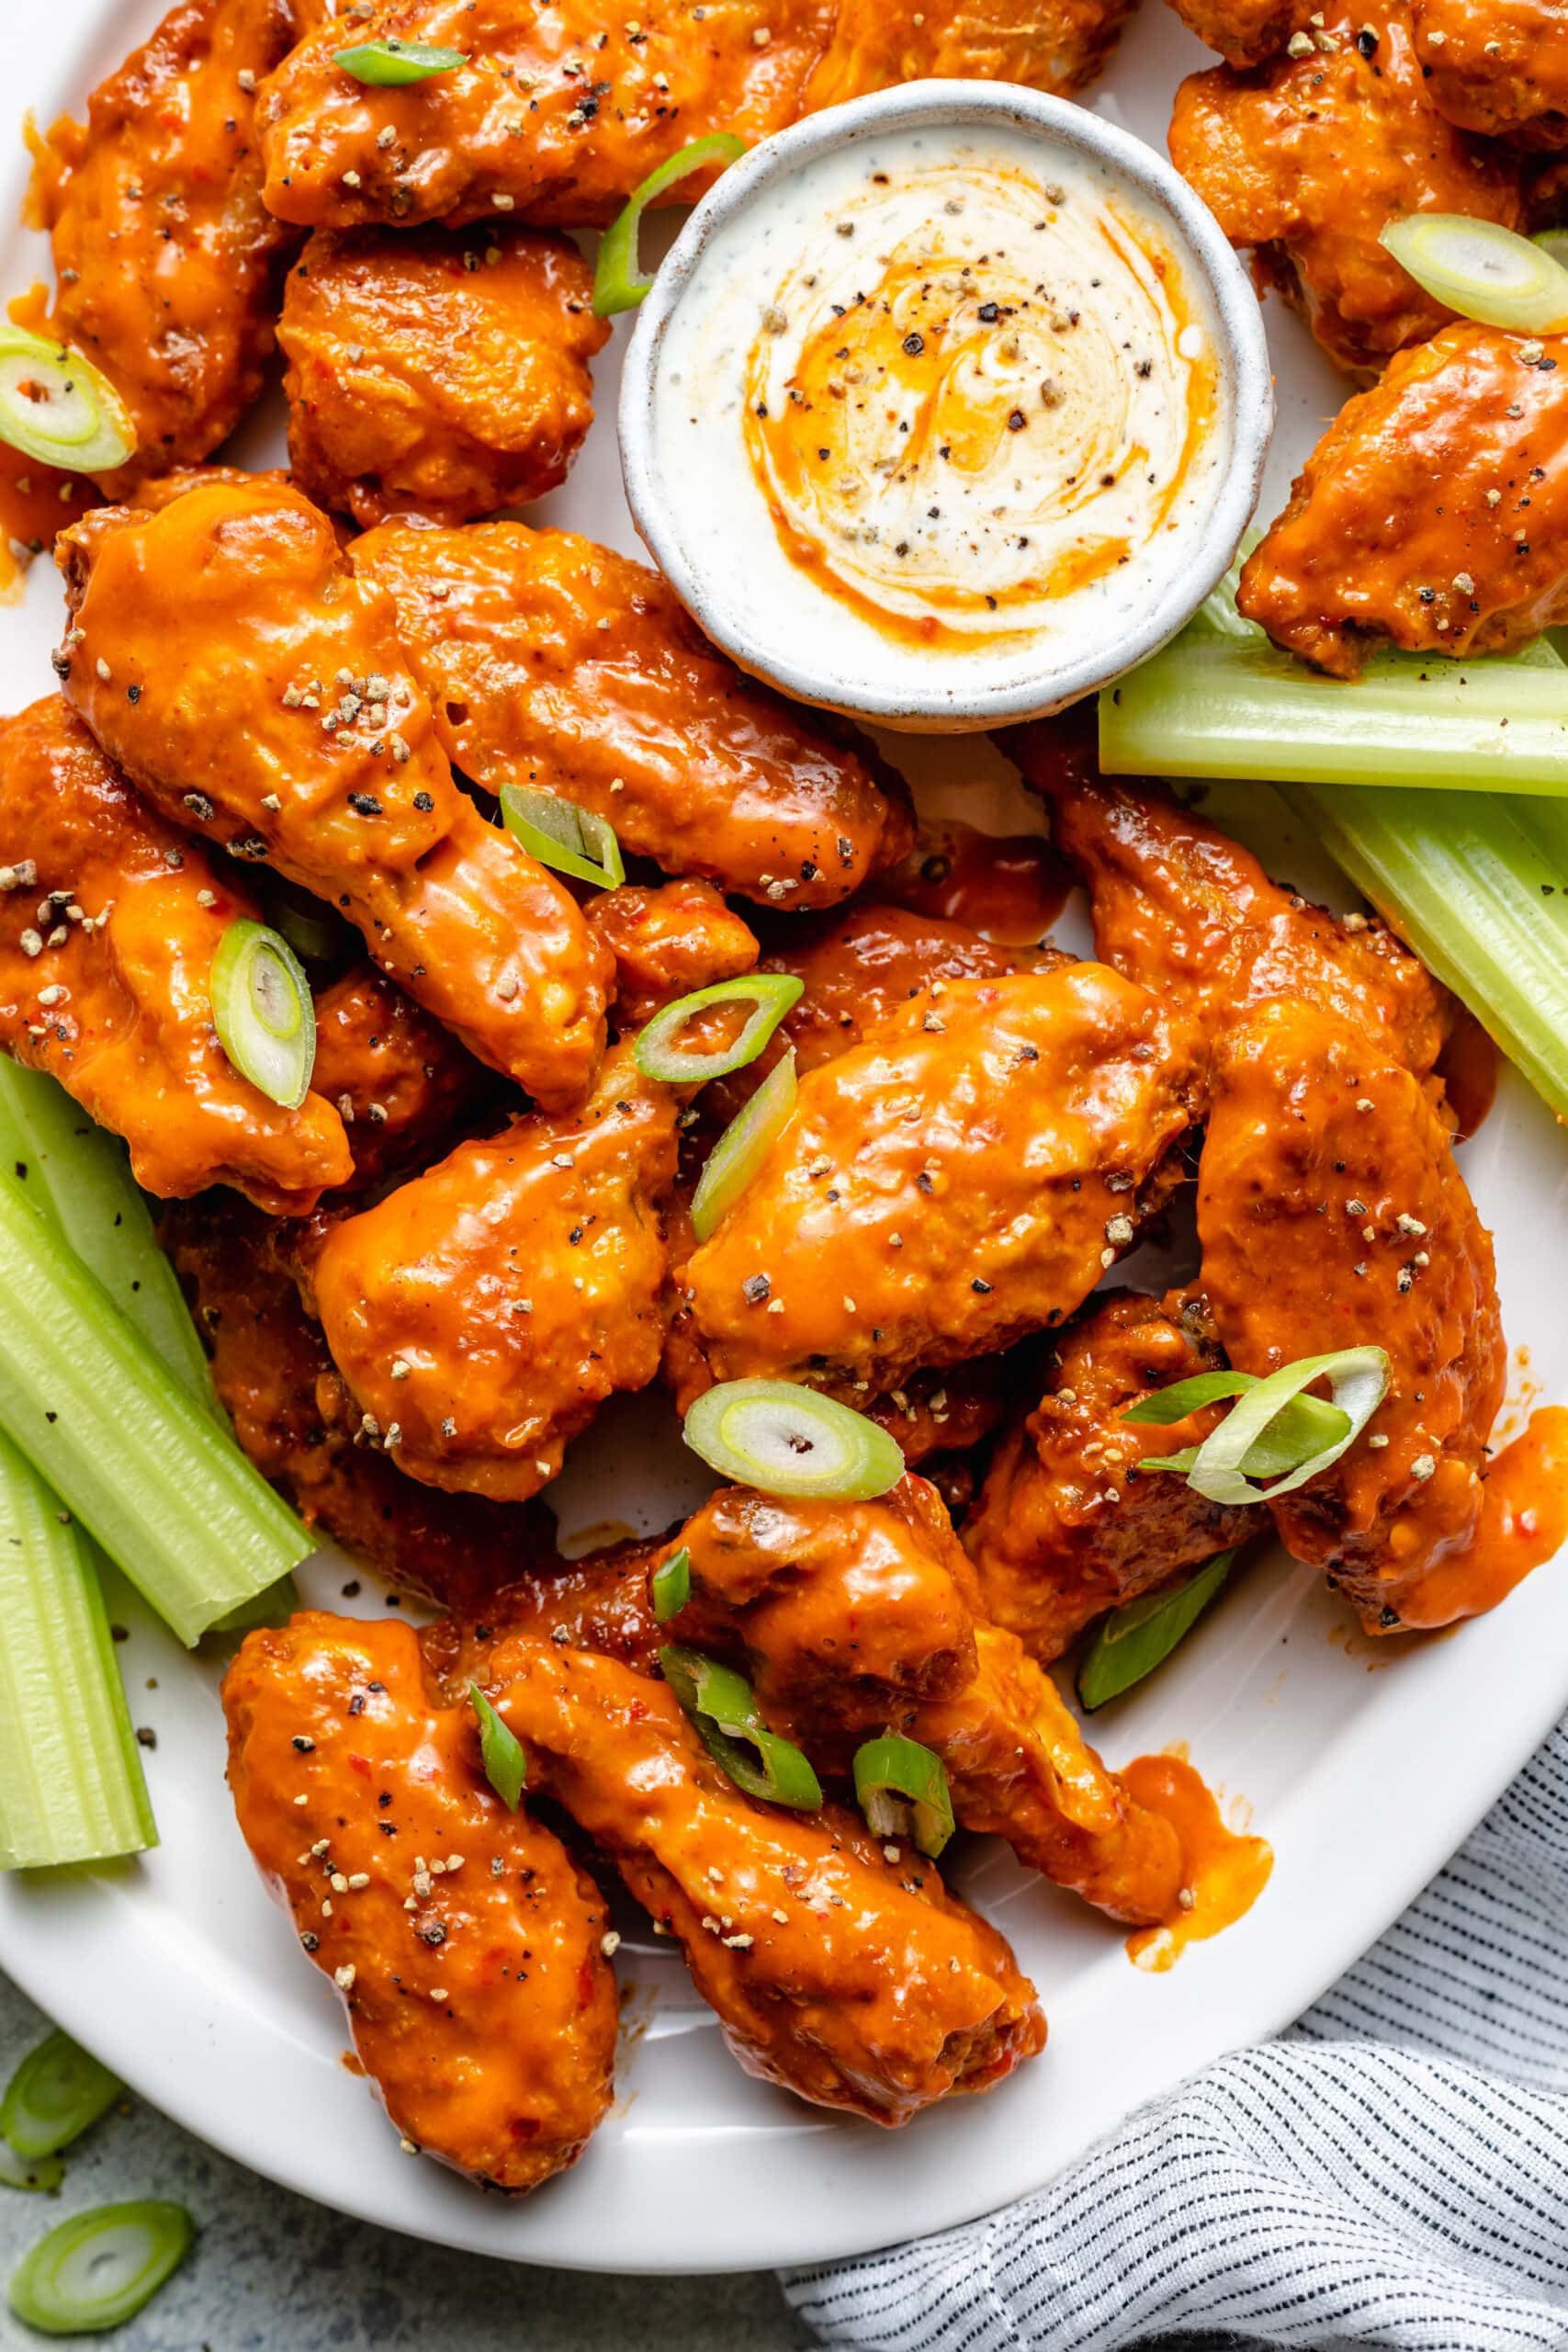 https://allthehealthythings.com/wp-content/uploads/2020/04/Crispy-Baked-Buffalo-Chicken-Wings-5-scaled.jpg